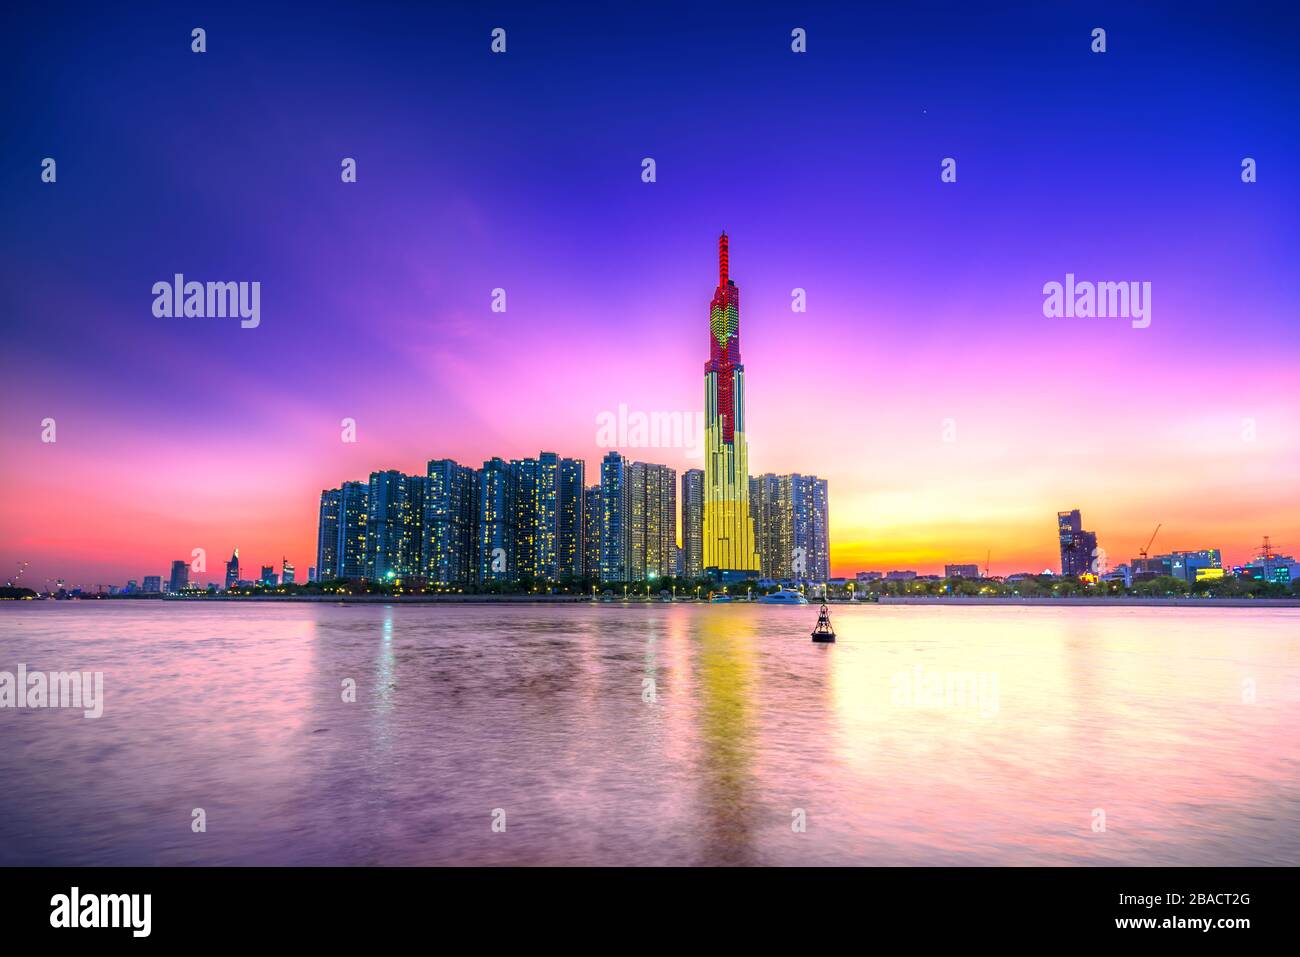 Colorful sunset landscape in a riverside urban area with skyscrapers showing the most economic development in Ho Chi Minh City, Vietnam Stock Photo